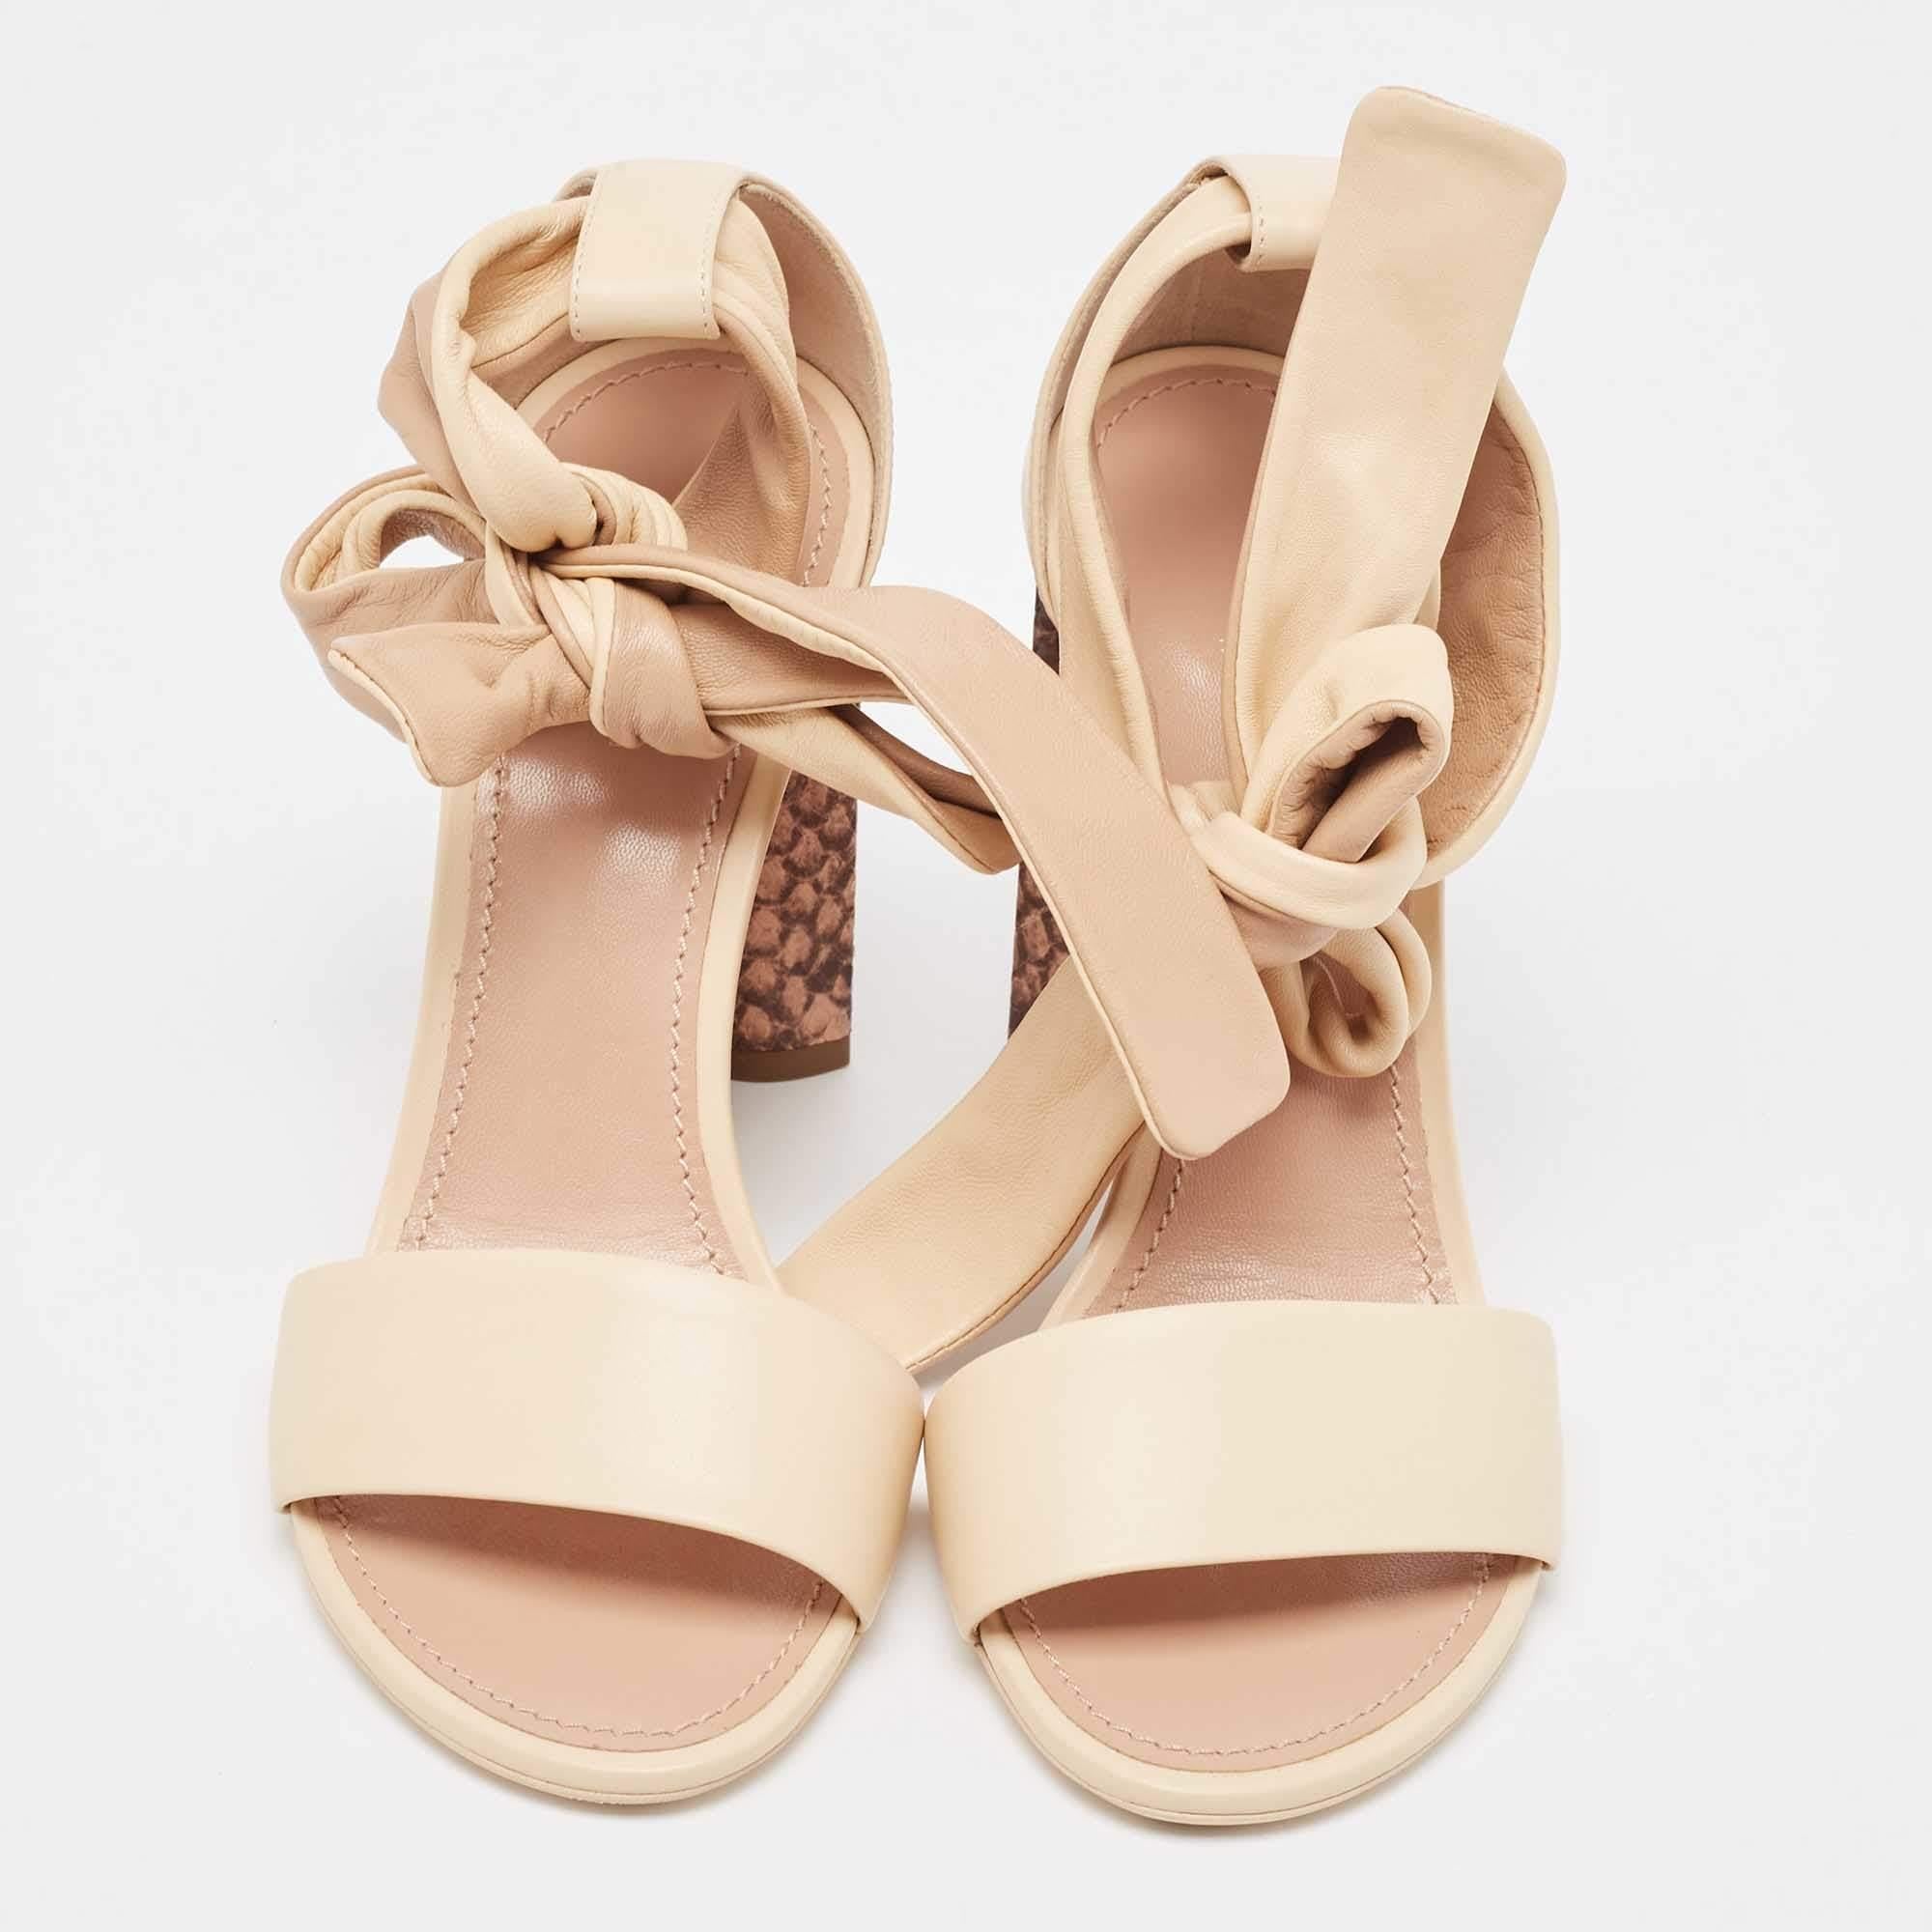 Wear these Louis Vuitton sandals to spruce up any outfit. They are versatile, chic, and can be easily styled. Made using quality materials, these sandals are well-built and long-lasting.

Includes: Original Dustbag

